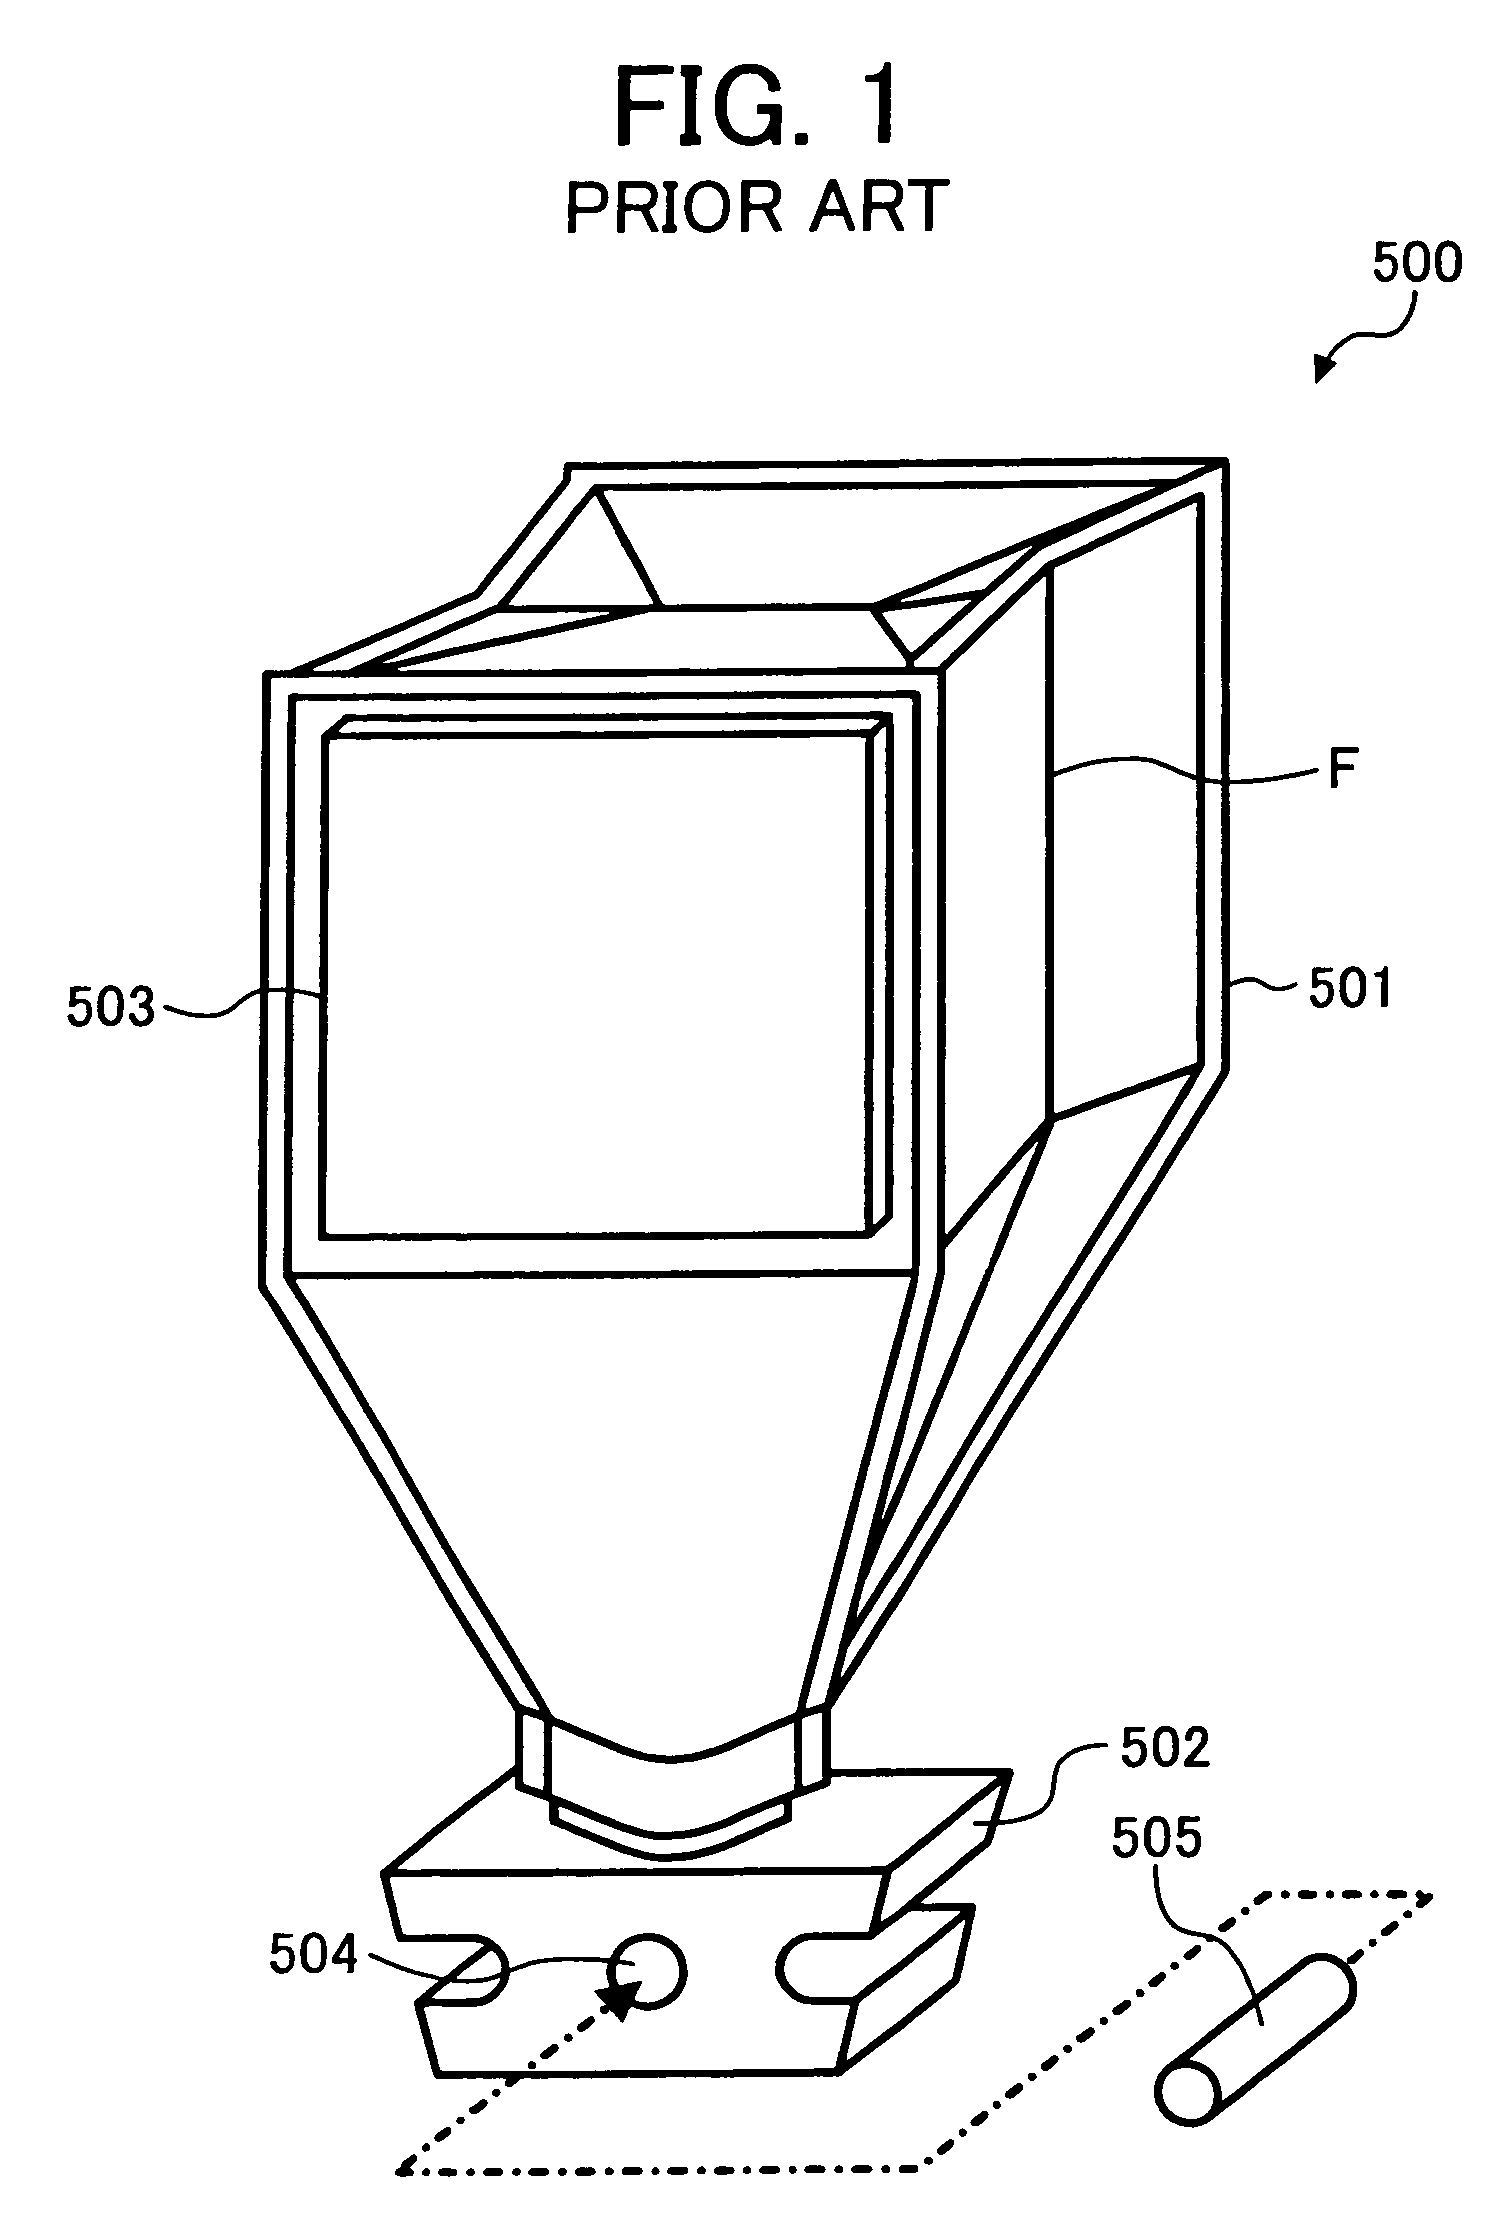 Apparatuses for image forming capable of effectively conveying developer therefrom and a method of effectively forming a reinforcing member adhering to the apparatuses